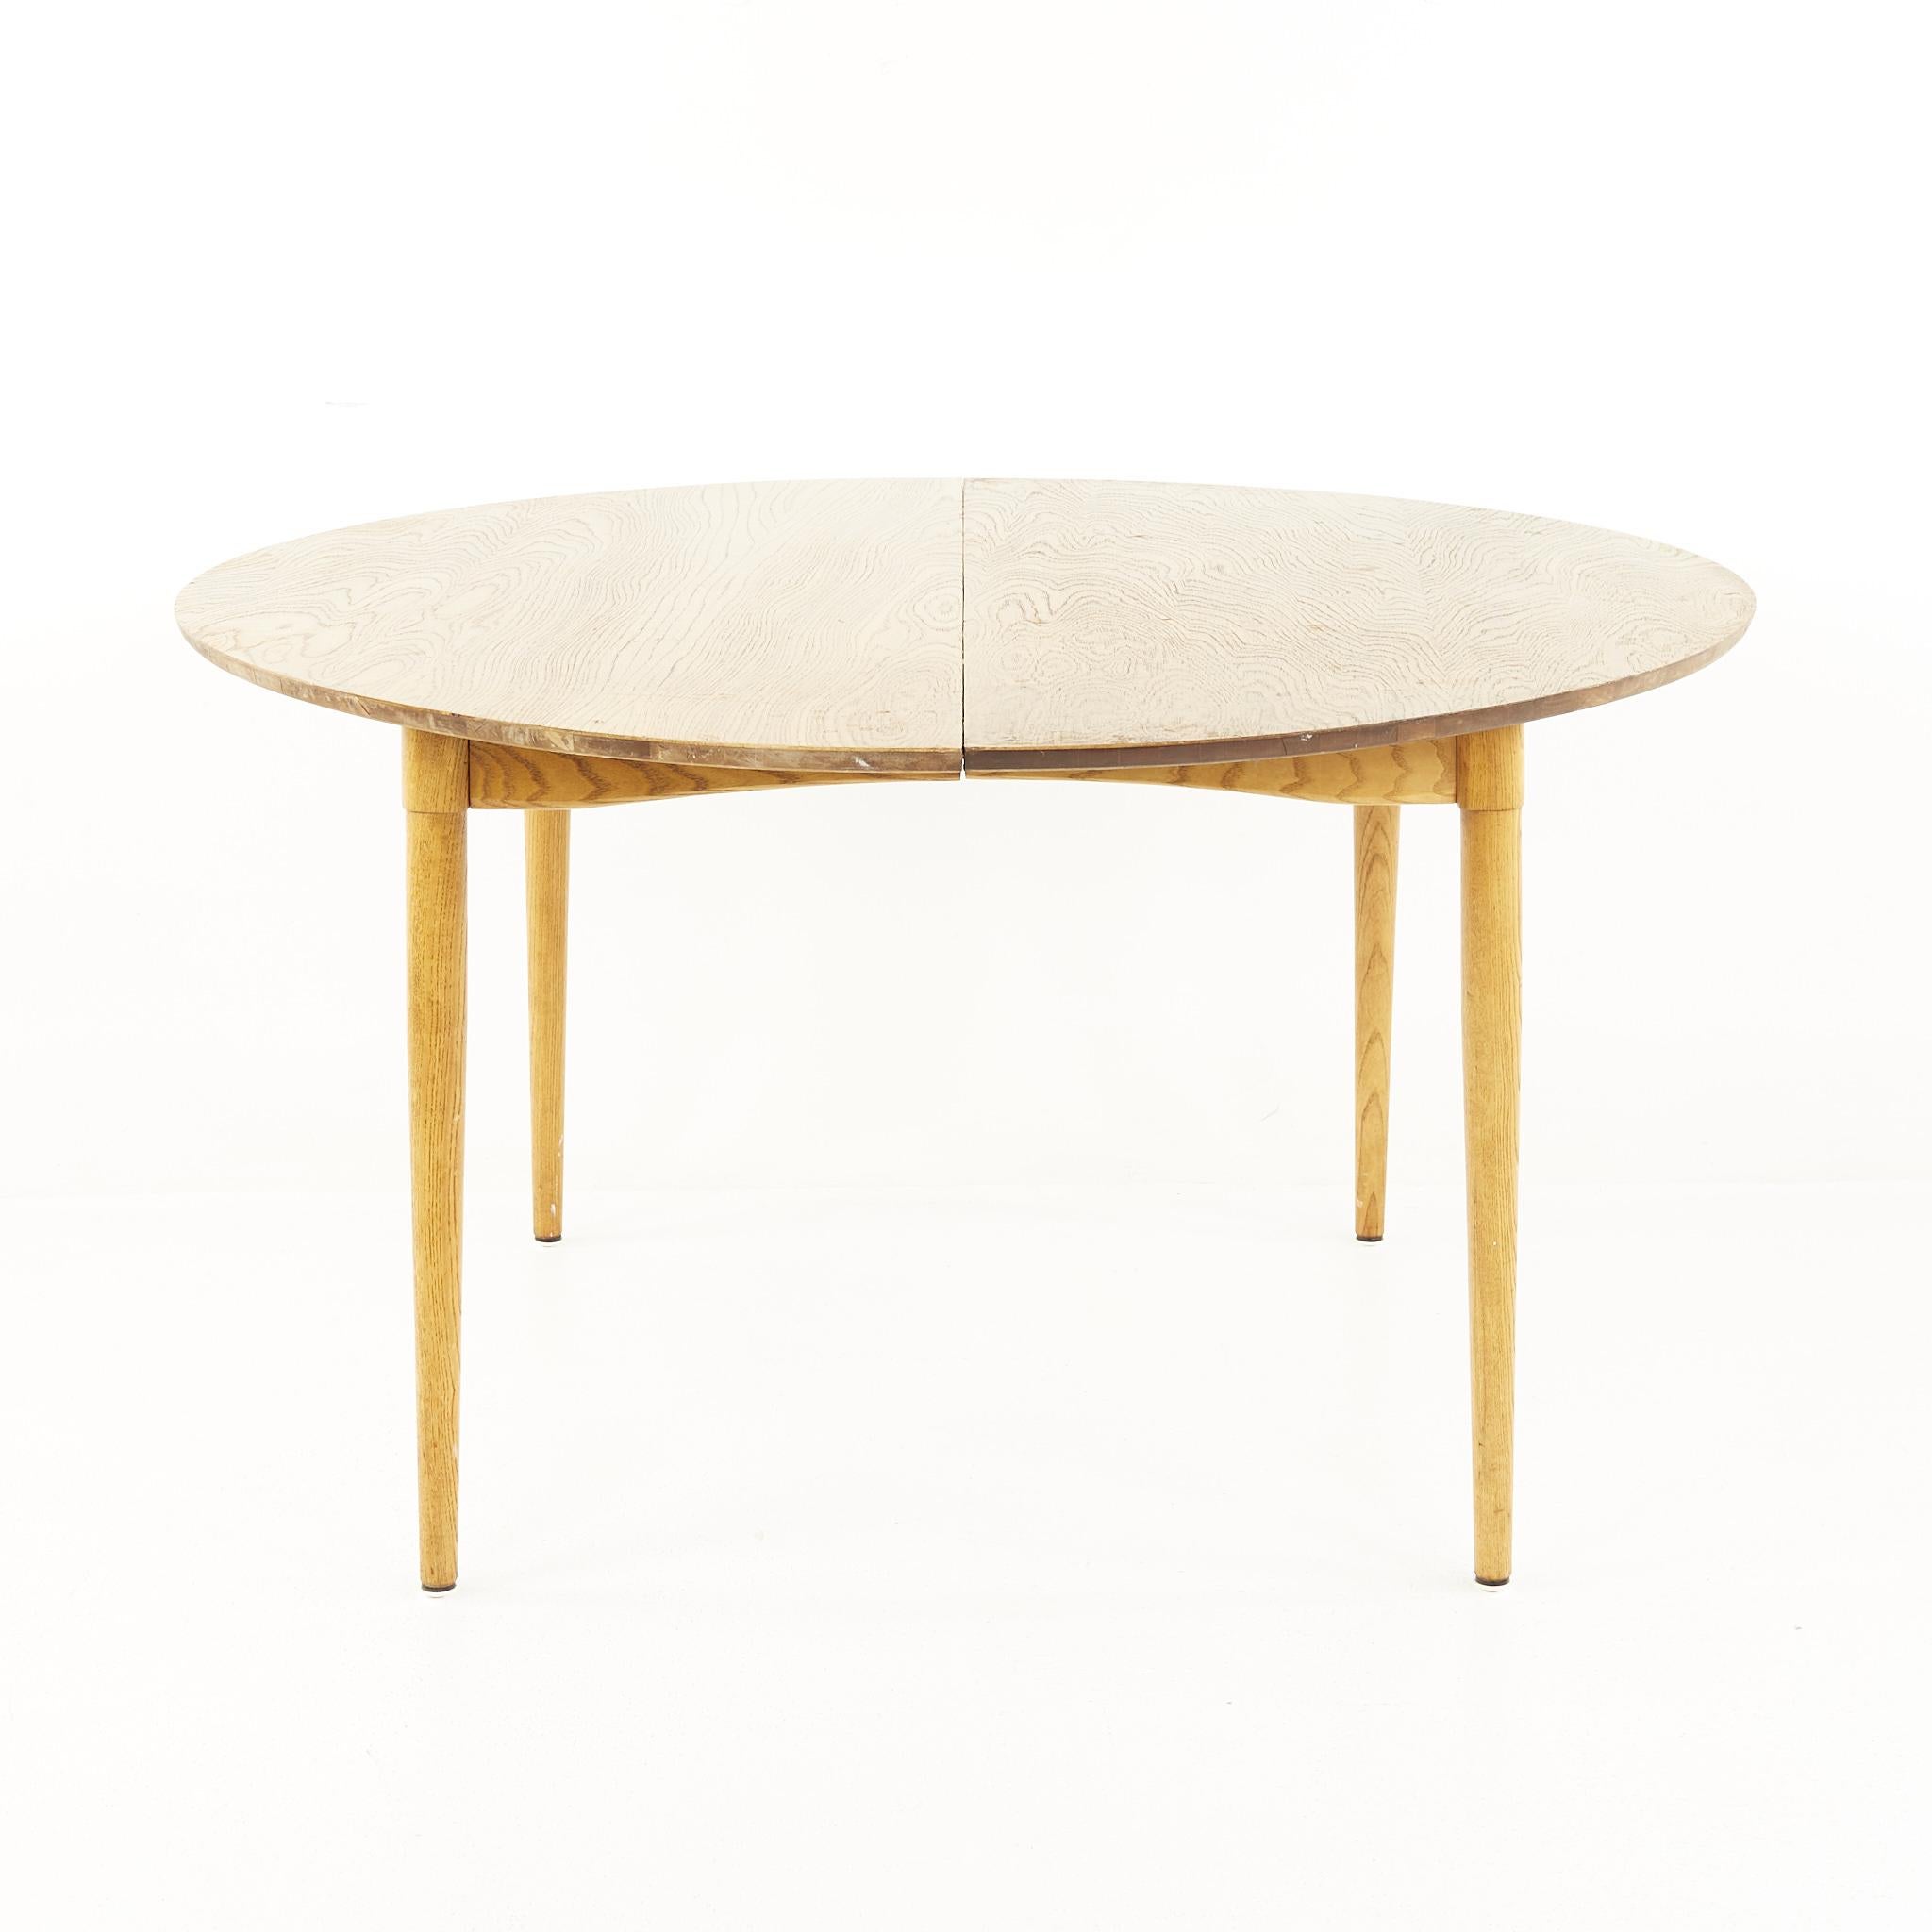 Greta Grossman For Glenn of California Mid Century dining table

The table measures: 47.5 wide x 47.5 deep x 26 high, with a chair clearance of 23 inches; the leaf measures 23.5 inches wide, making a maximum table width of 71 inches when the leaf